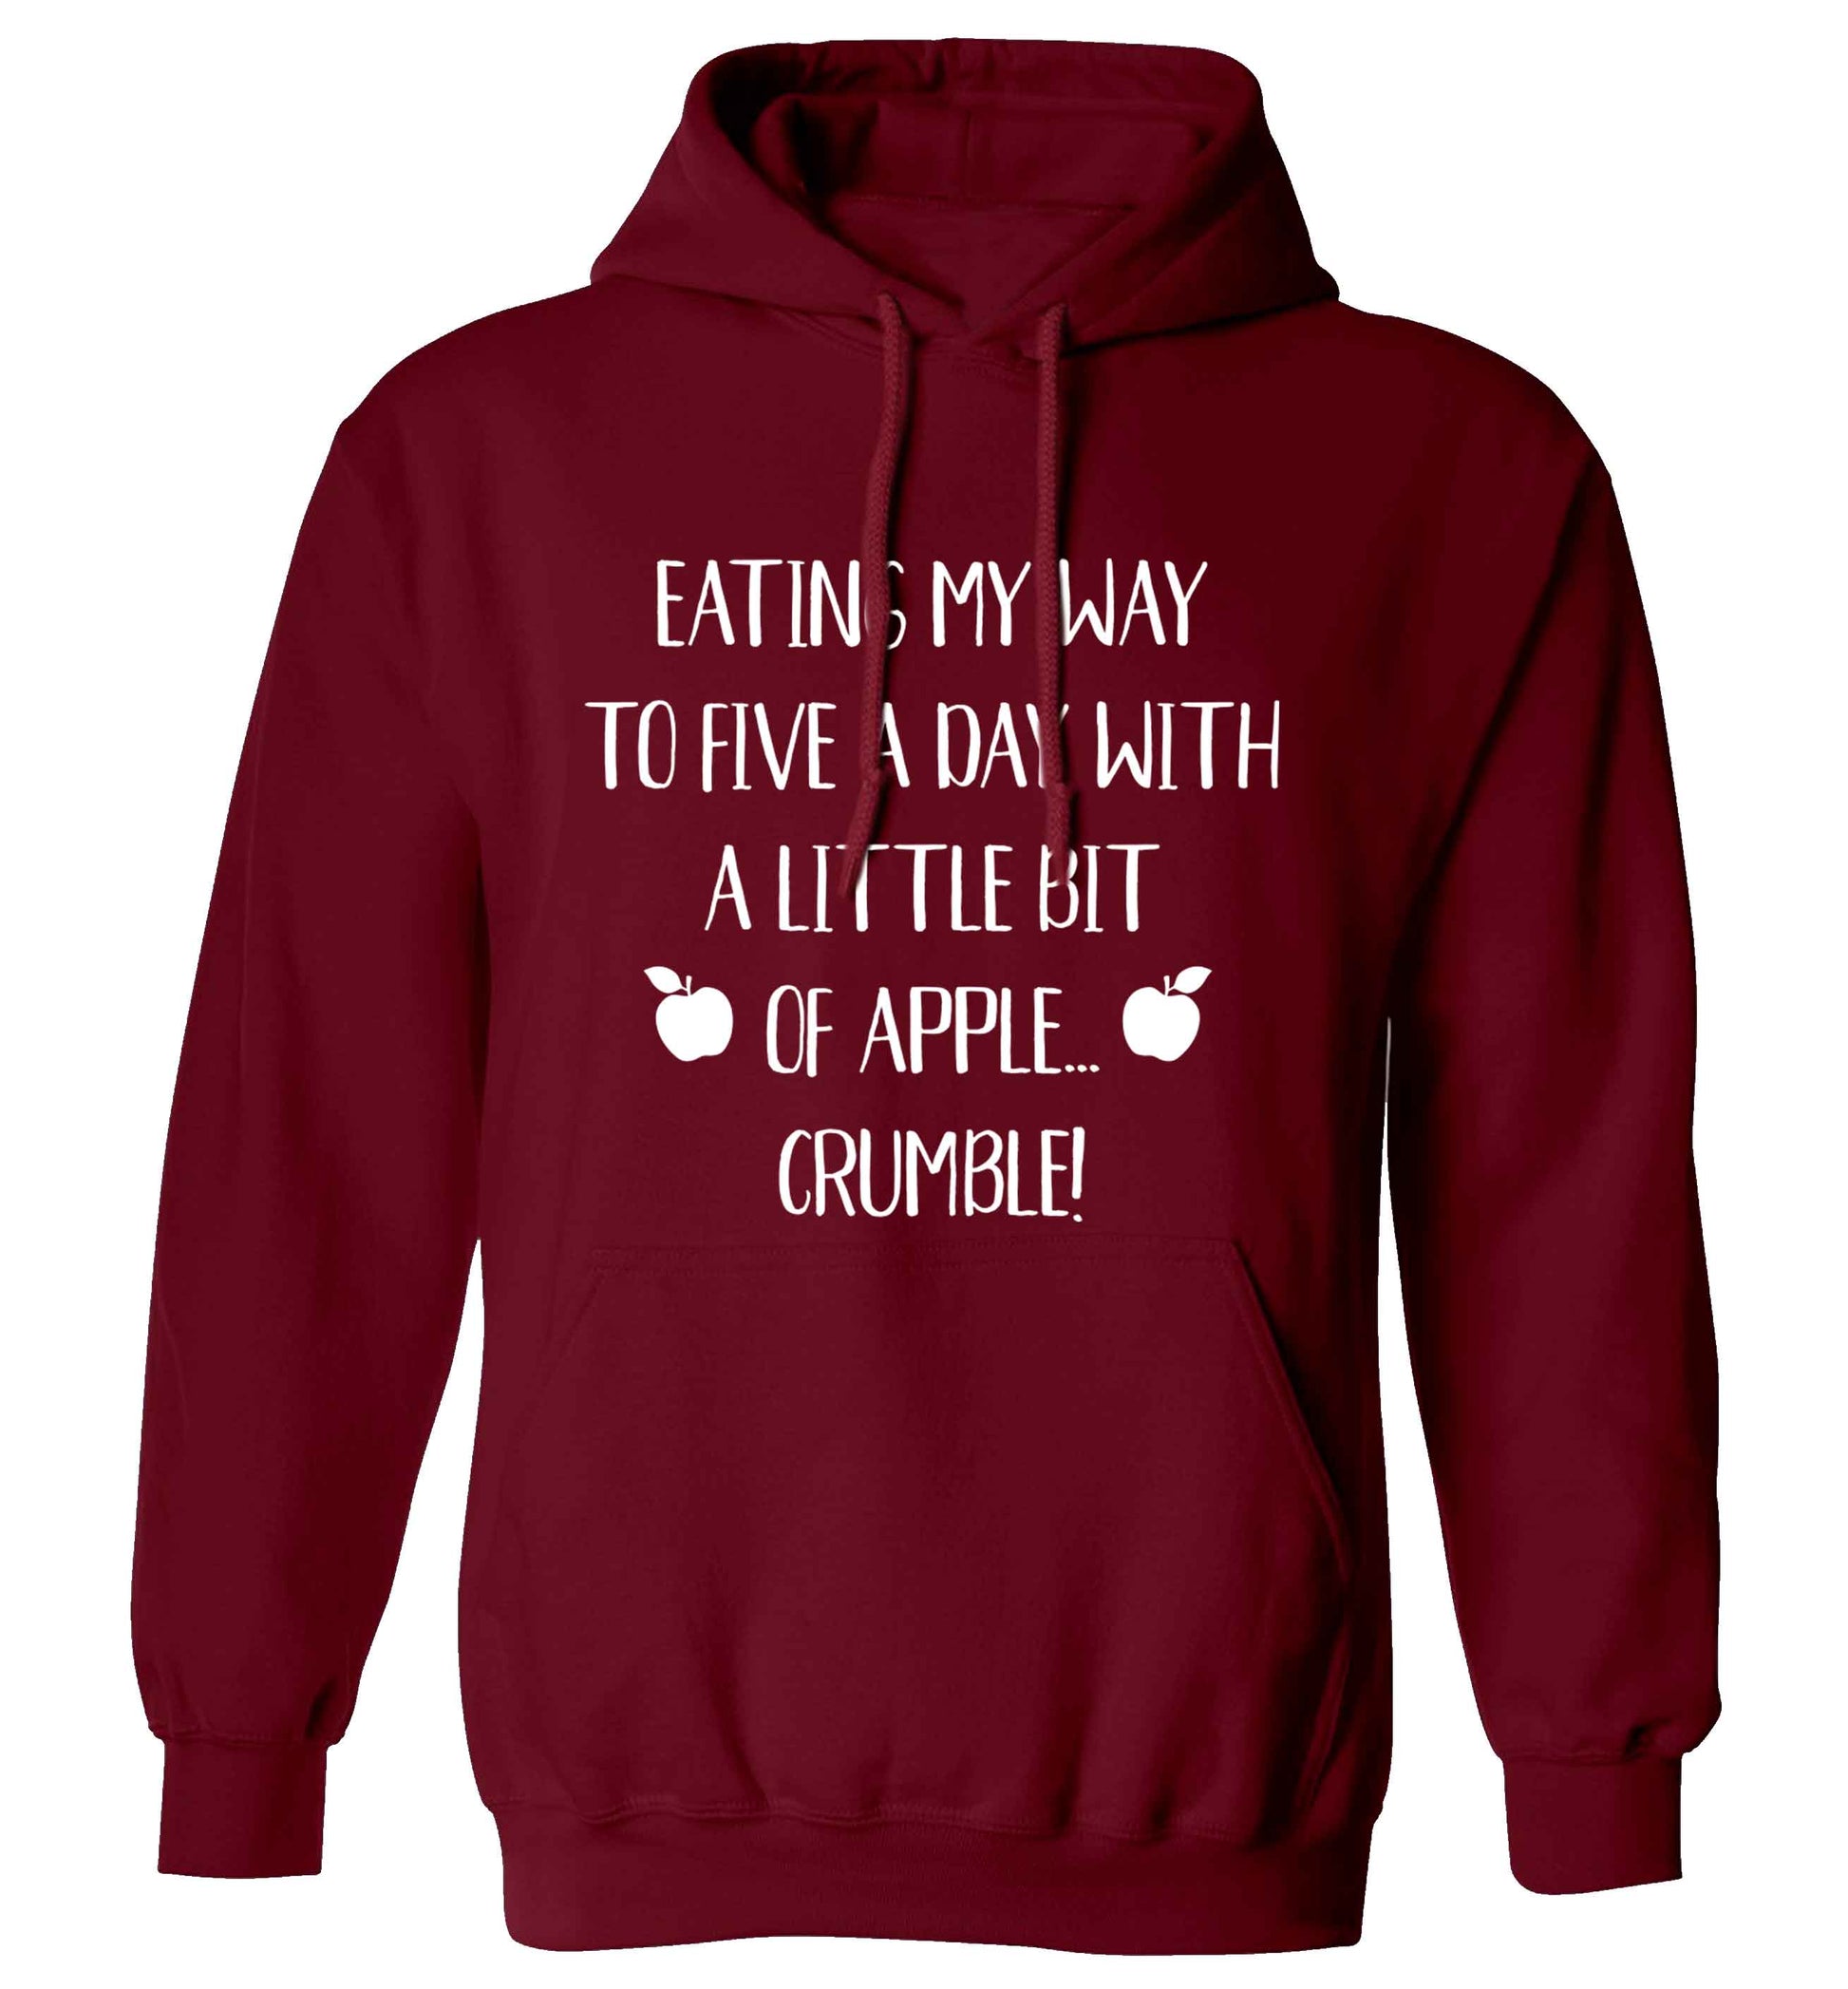 Eating my way to five a day with a little bit of apple crumble adults unisex maroon hoodie 2XL